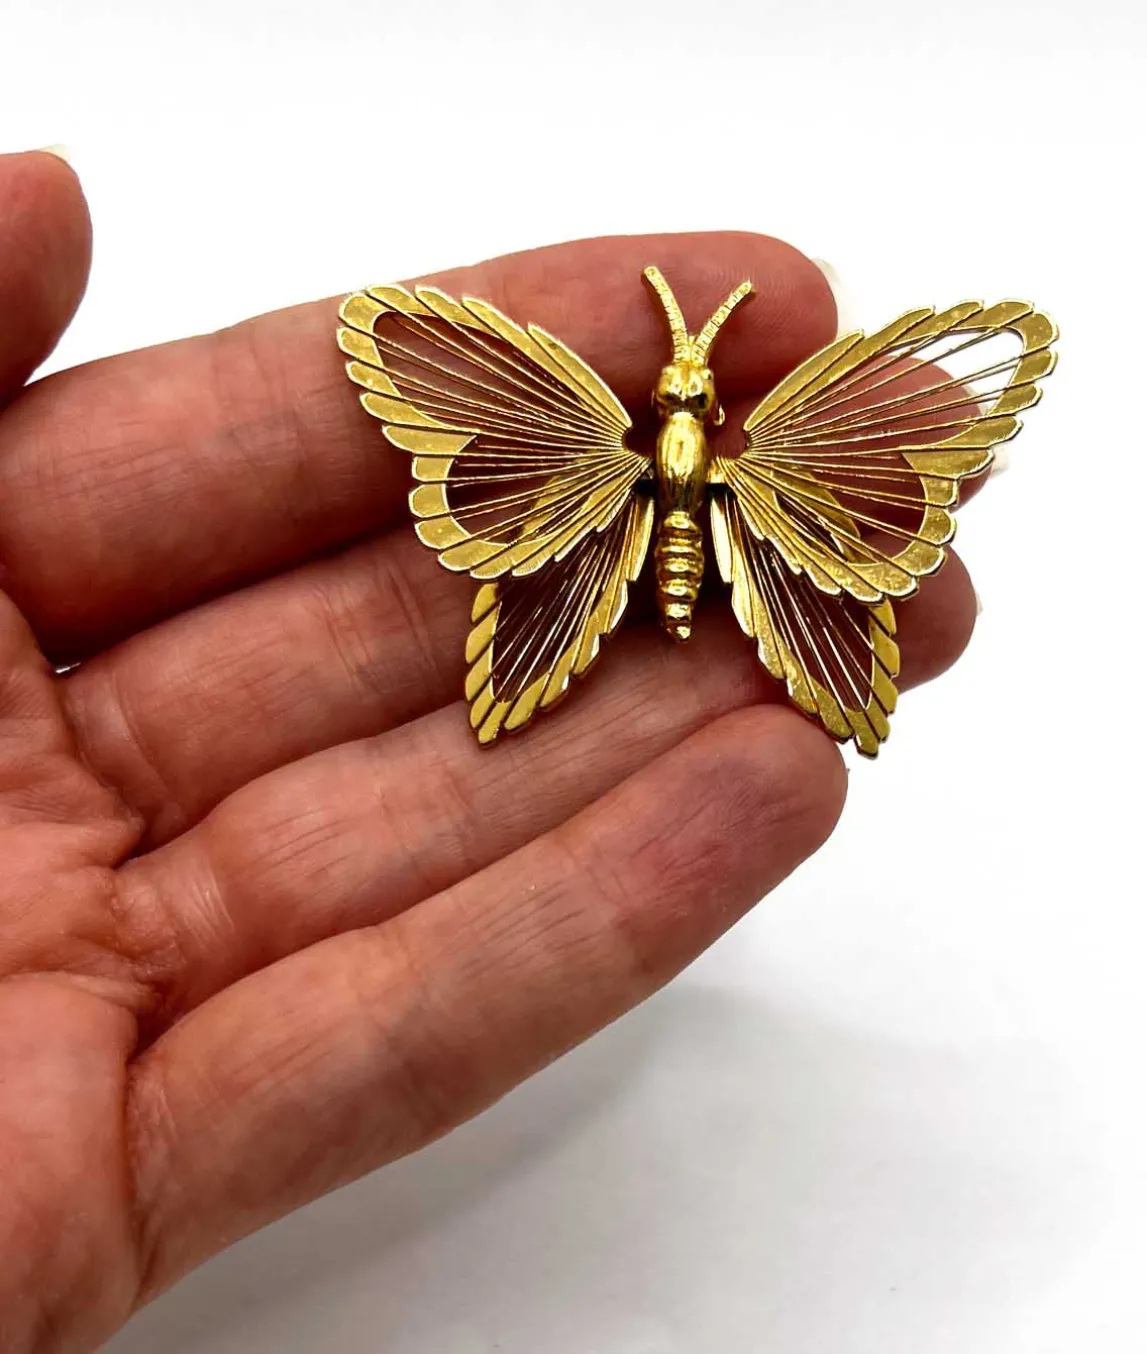 GOLD PLATED BUTTERFLY PINS 2 INCHES WIDE BOTH SIGNED VINTAGE SOLD TOGETHER